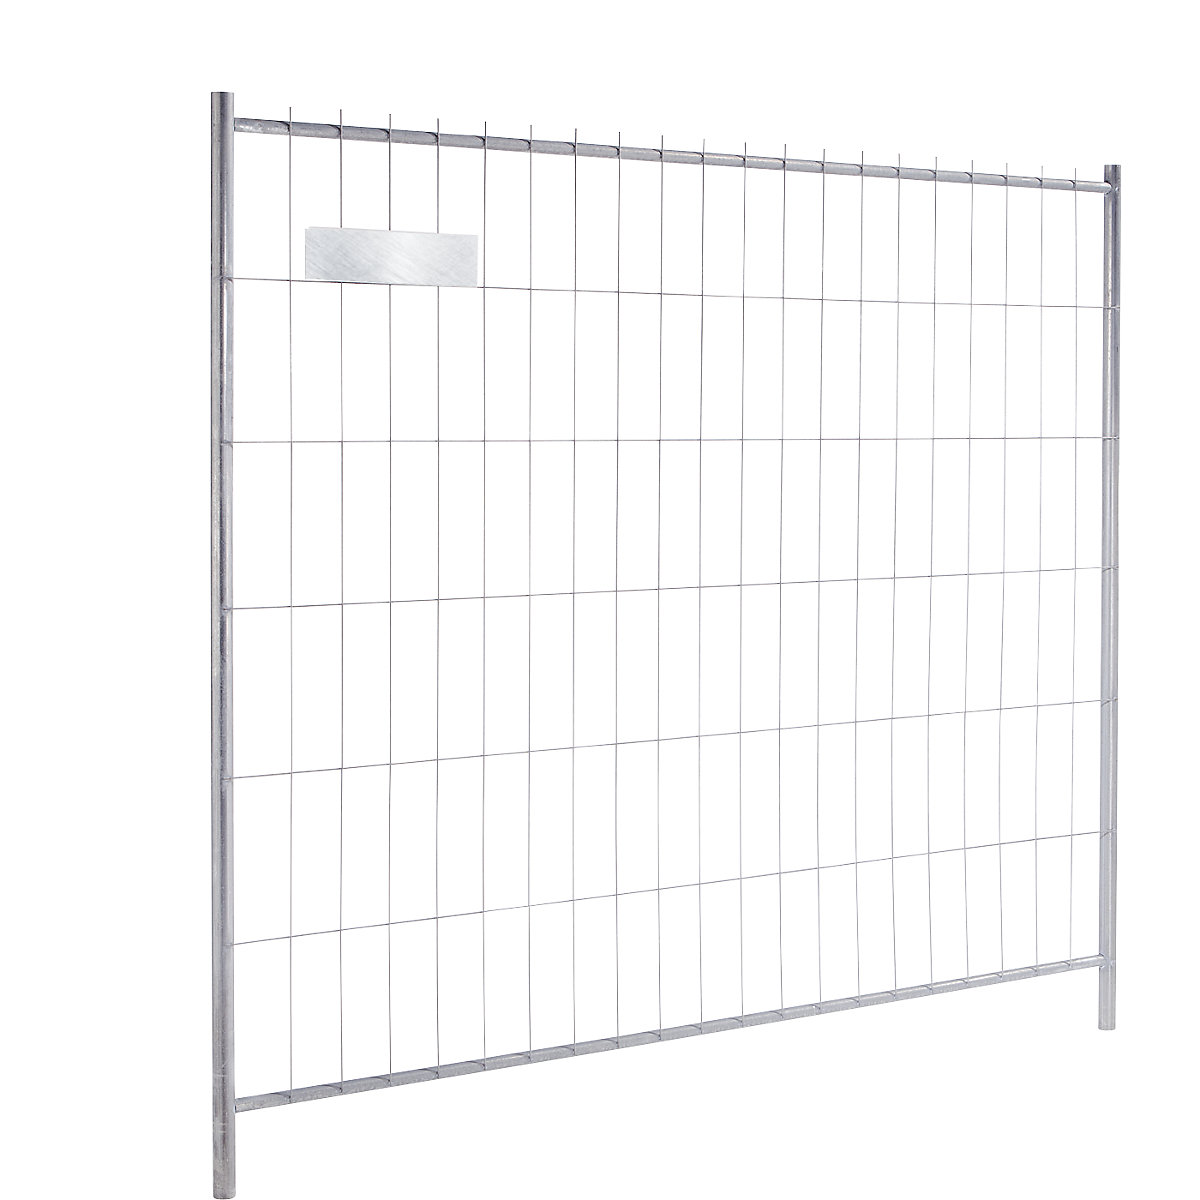 Site fencing, wall unit, width 2200 mm, height 2000 mm-4